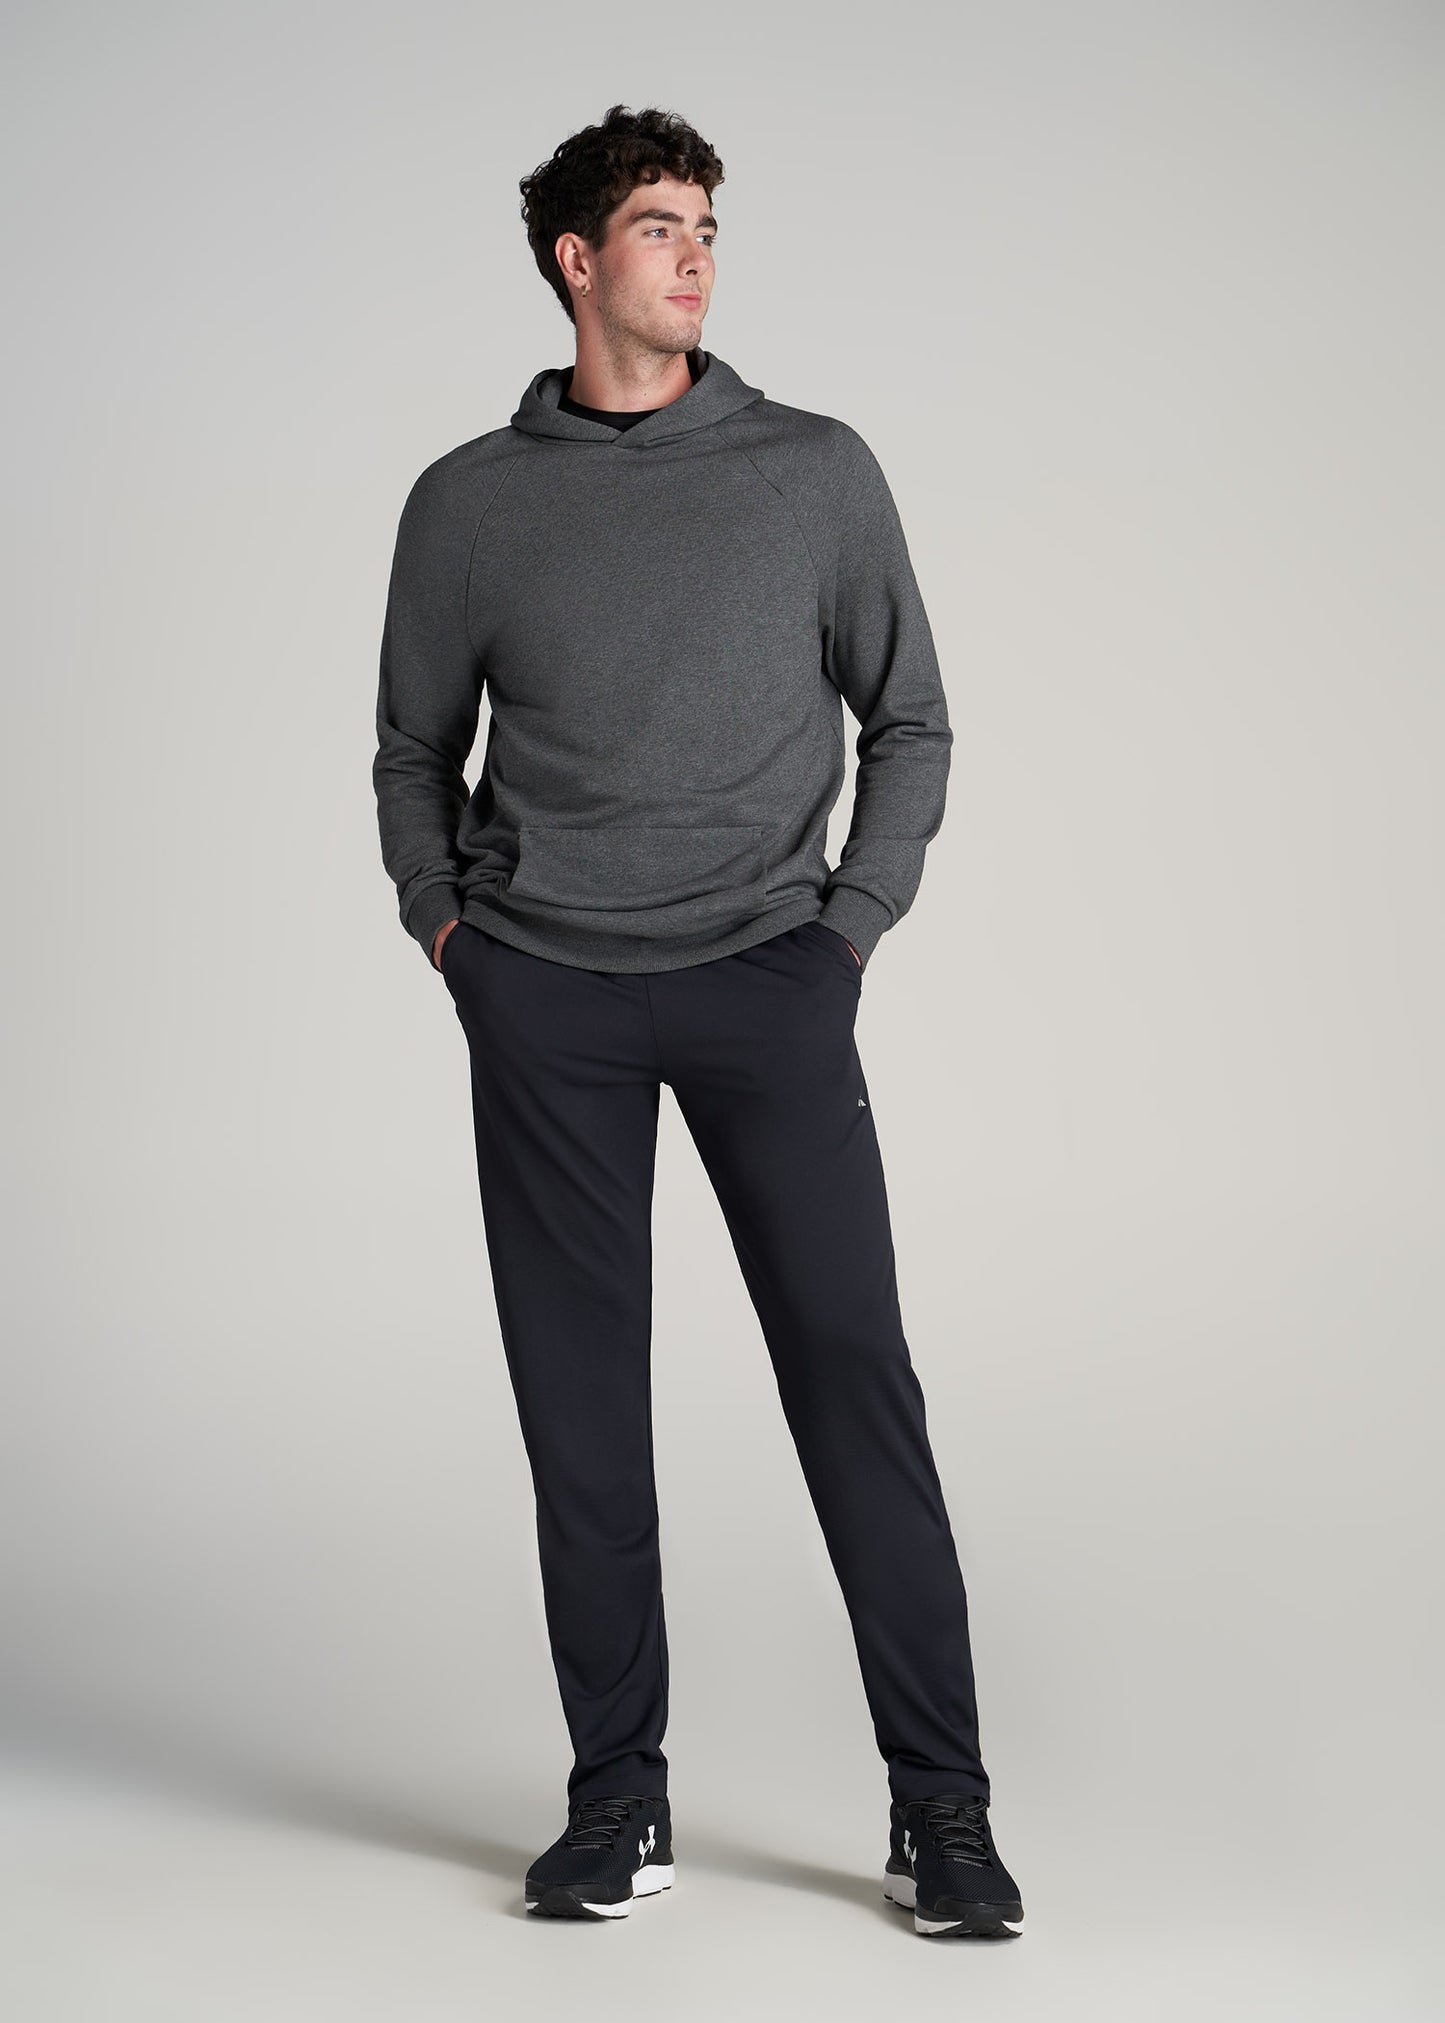 Tall Men's Poly Track Pant, Zip Bottom - BLACK and NAVY - FINAL SALE /